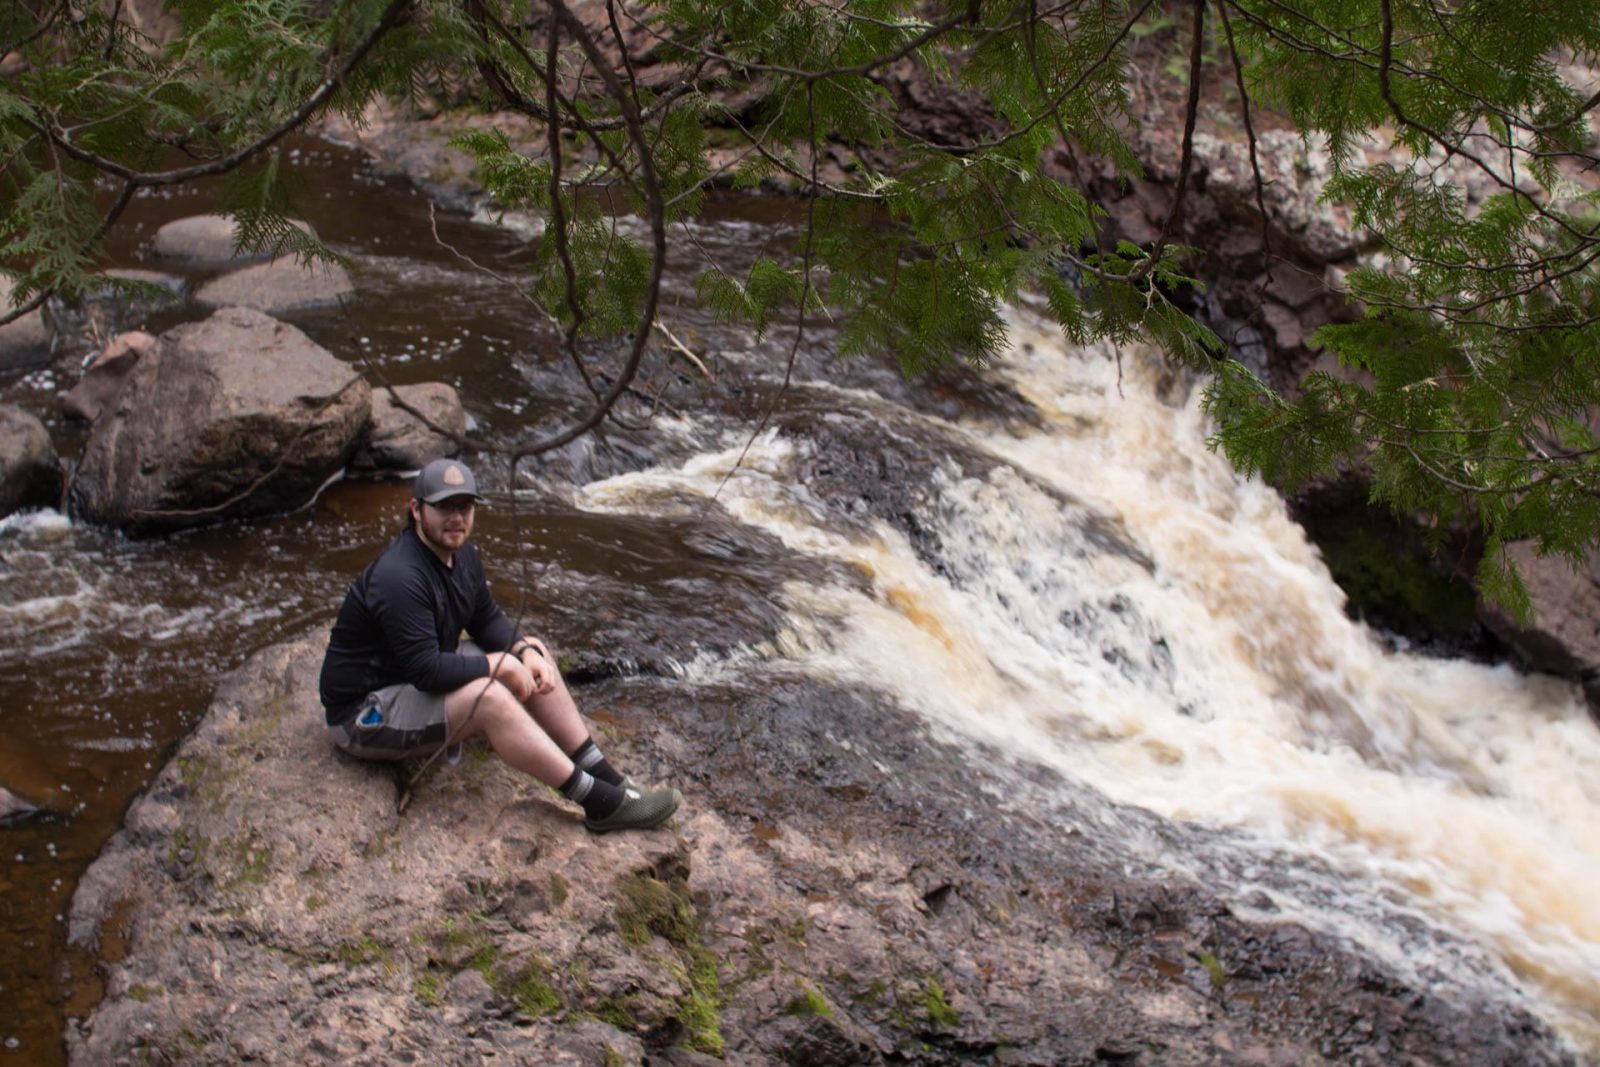 Our engagement story - getting engaged at Amnicon Falls State Park in Wisconsin.